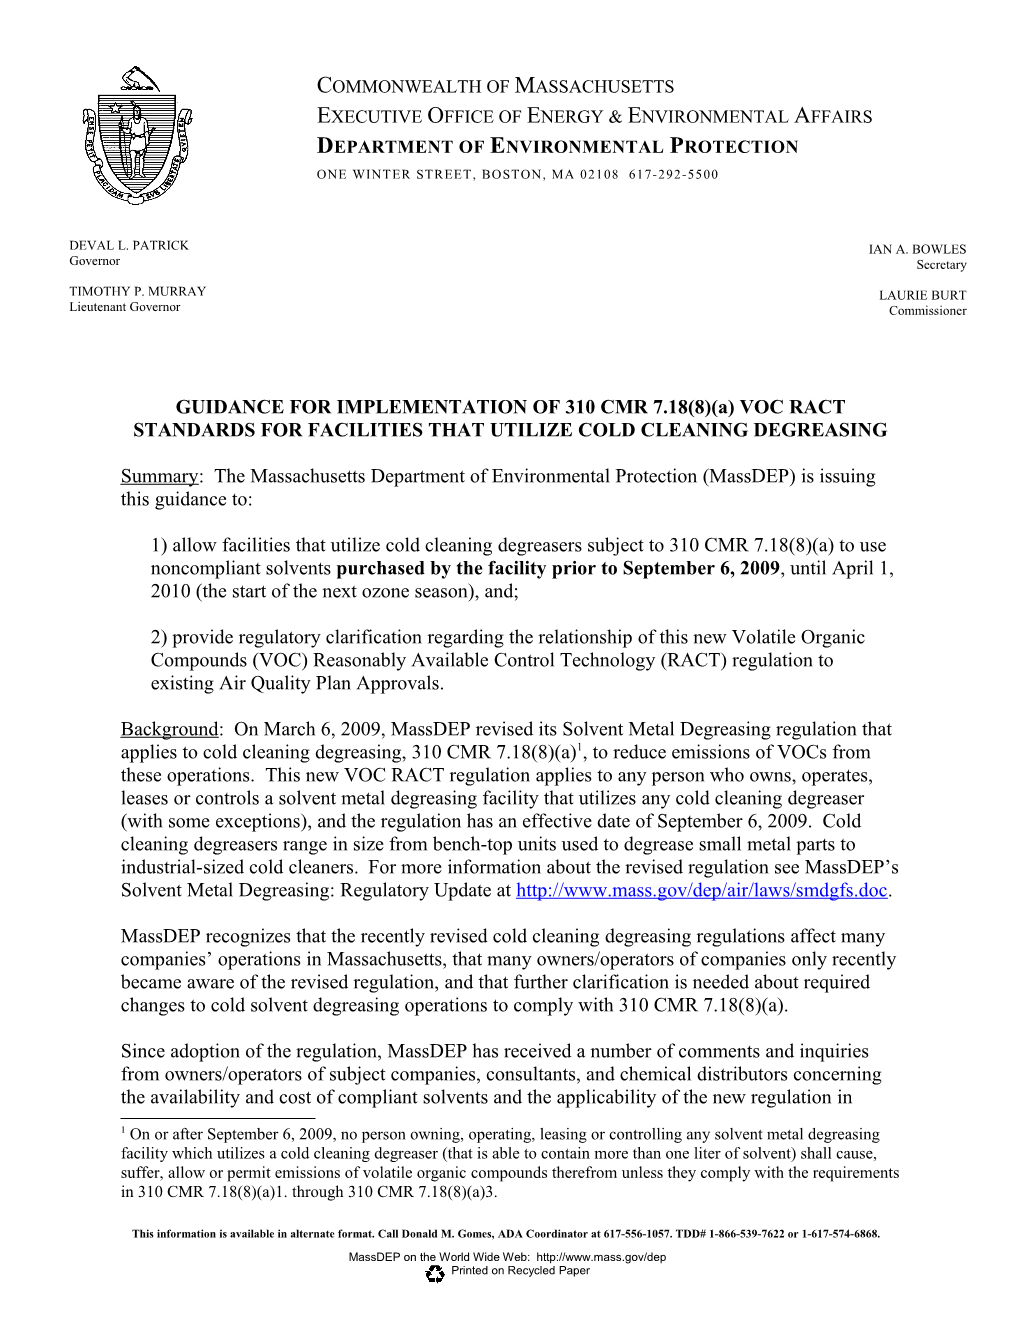 The Department Of Environmental Protection (Massdep) Has Received Several Requests On Whether The New VOC RACT Standard For Cold Solvent Degreasing Operations, 310 CMR 7